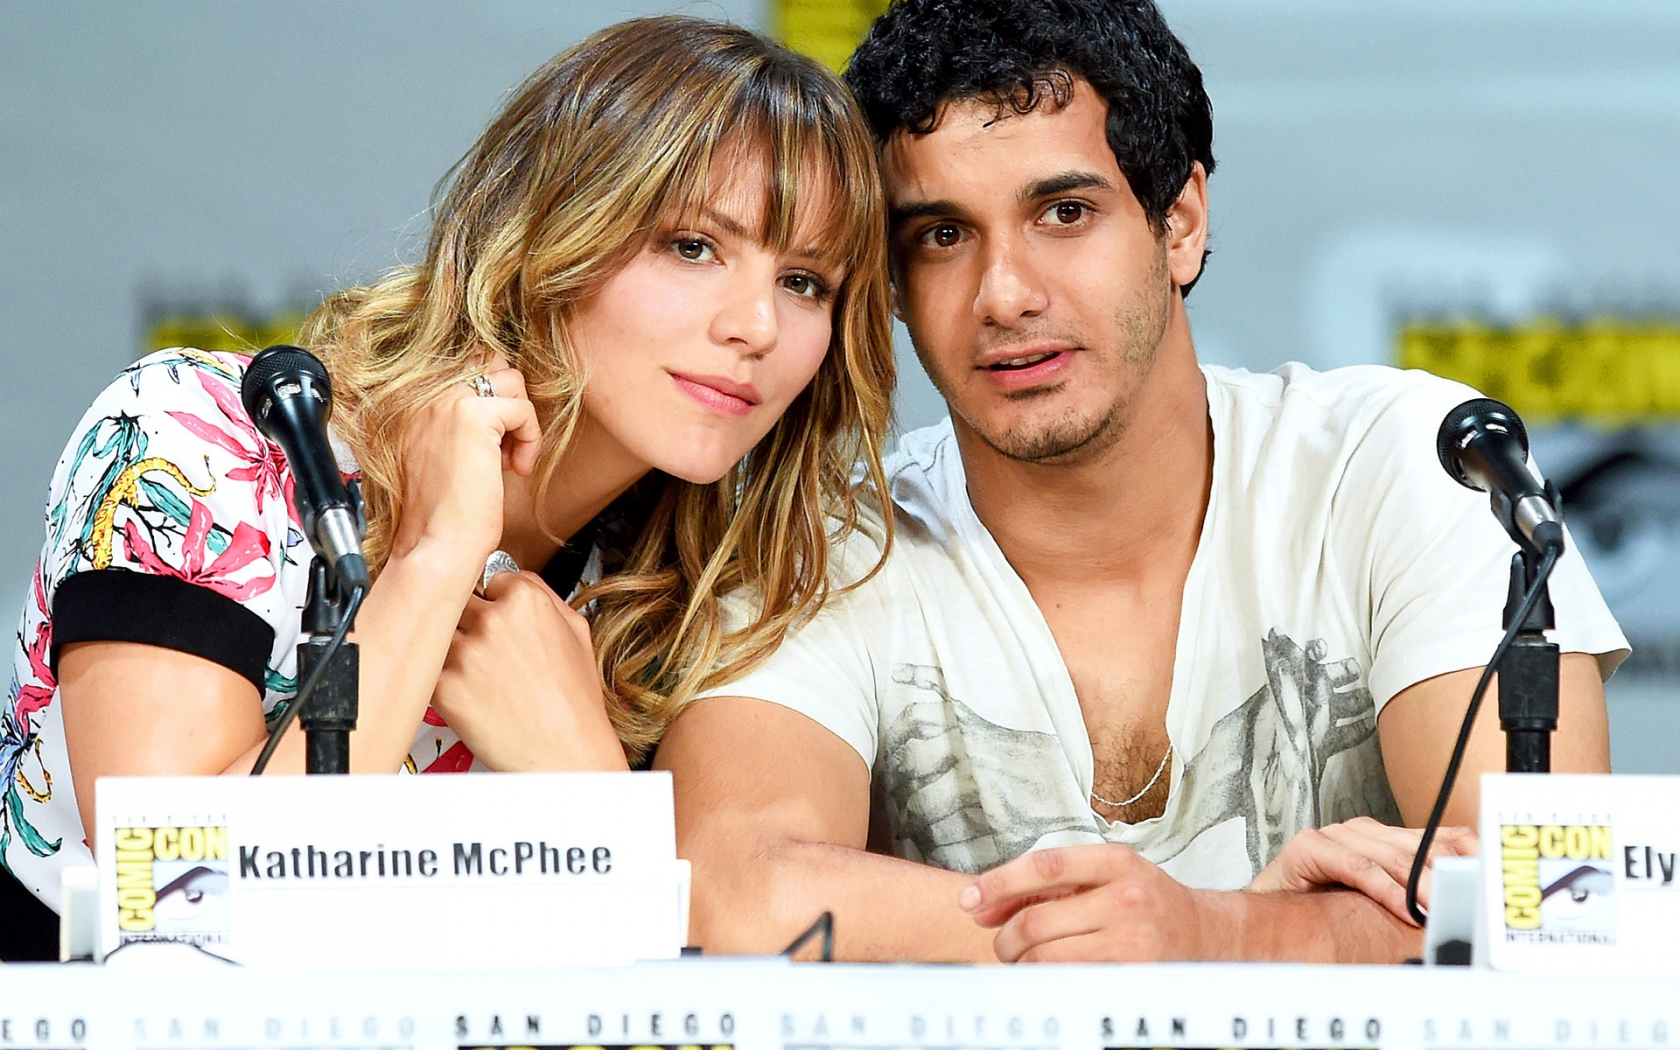 Katharine McPhee and Elyes Gabel for 1680 x 1050 widescreen resolution